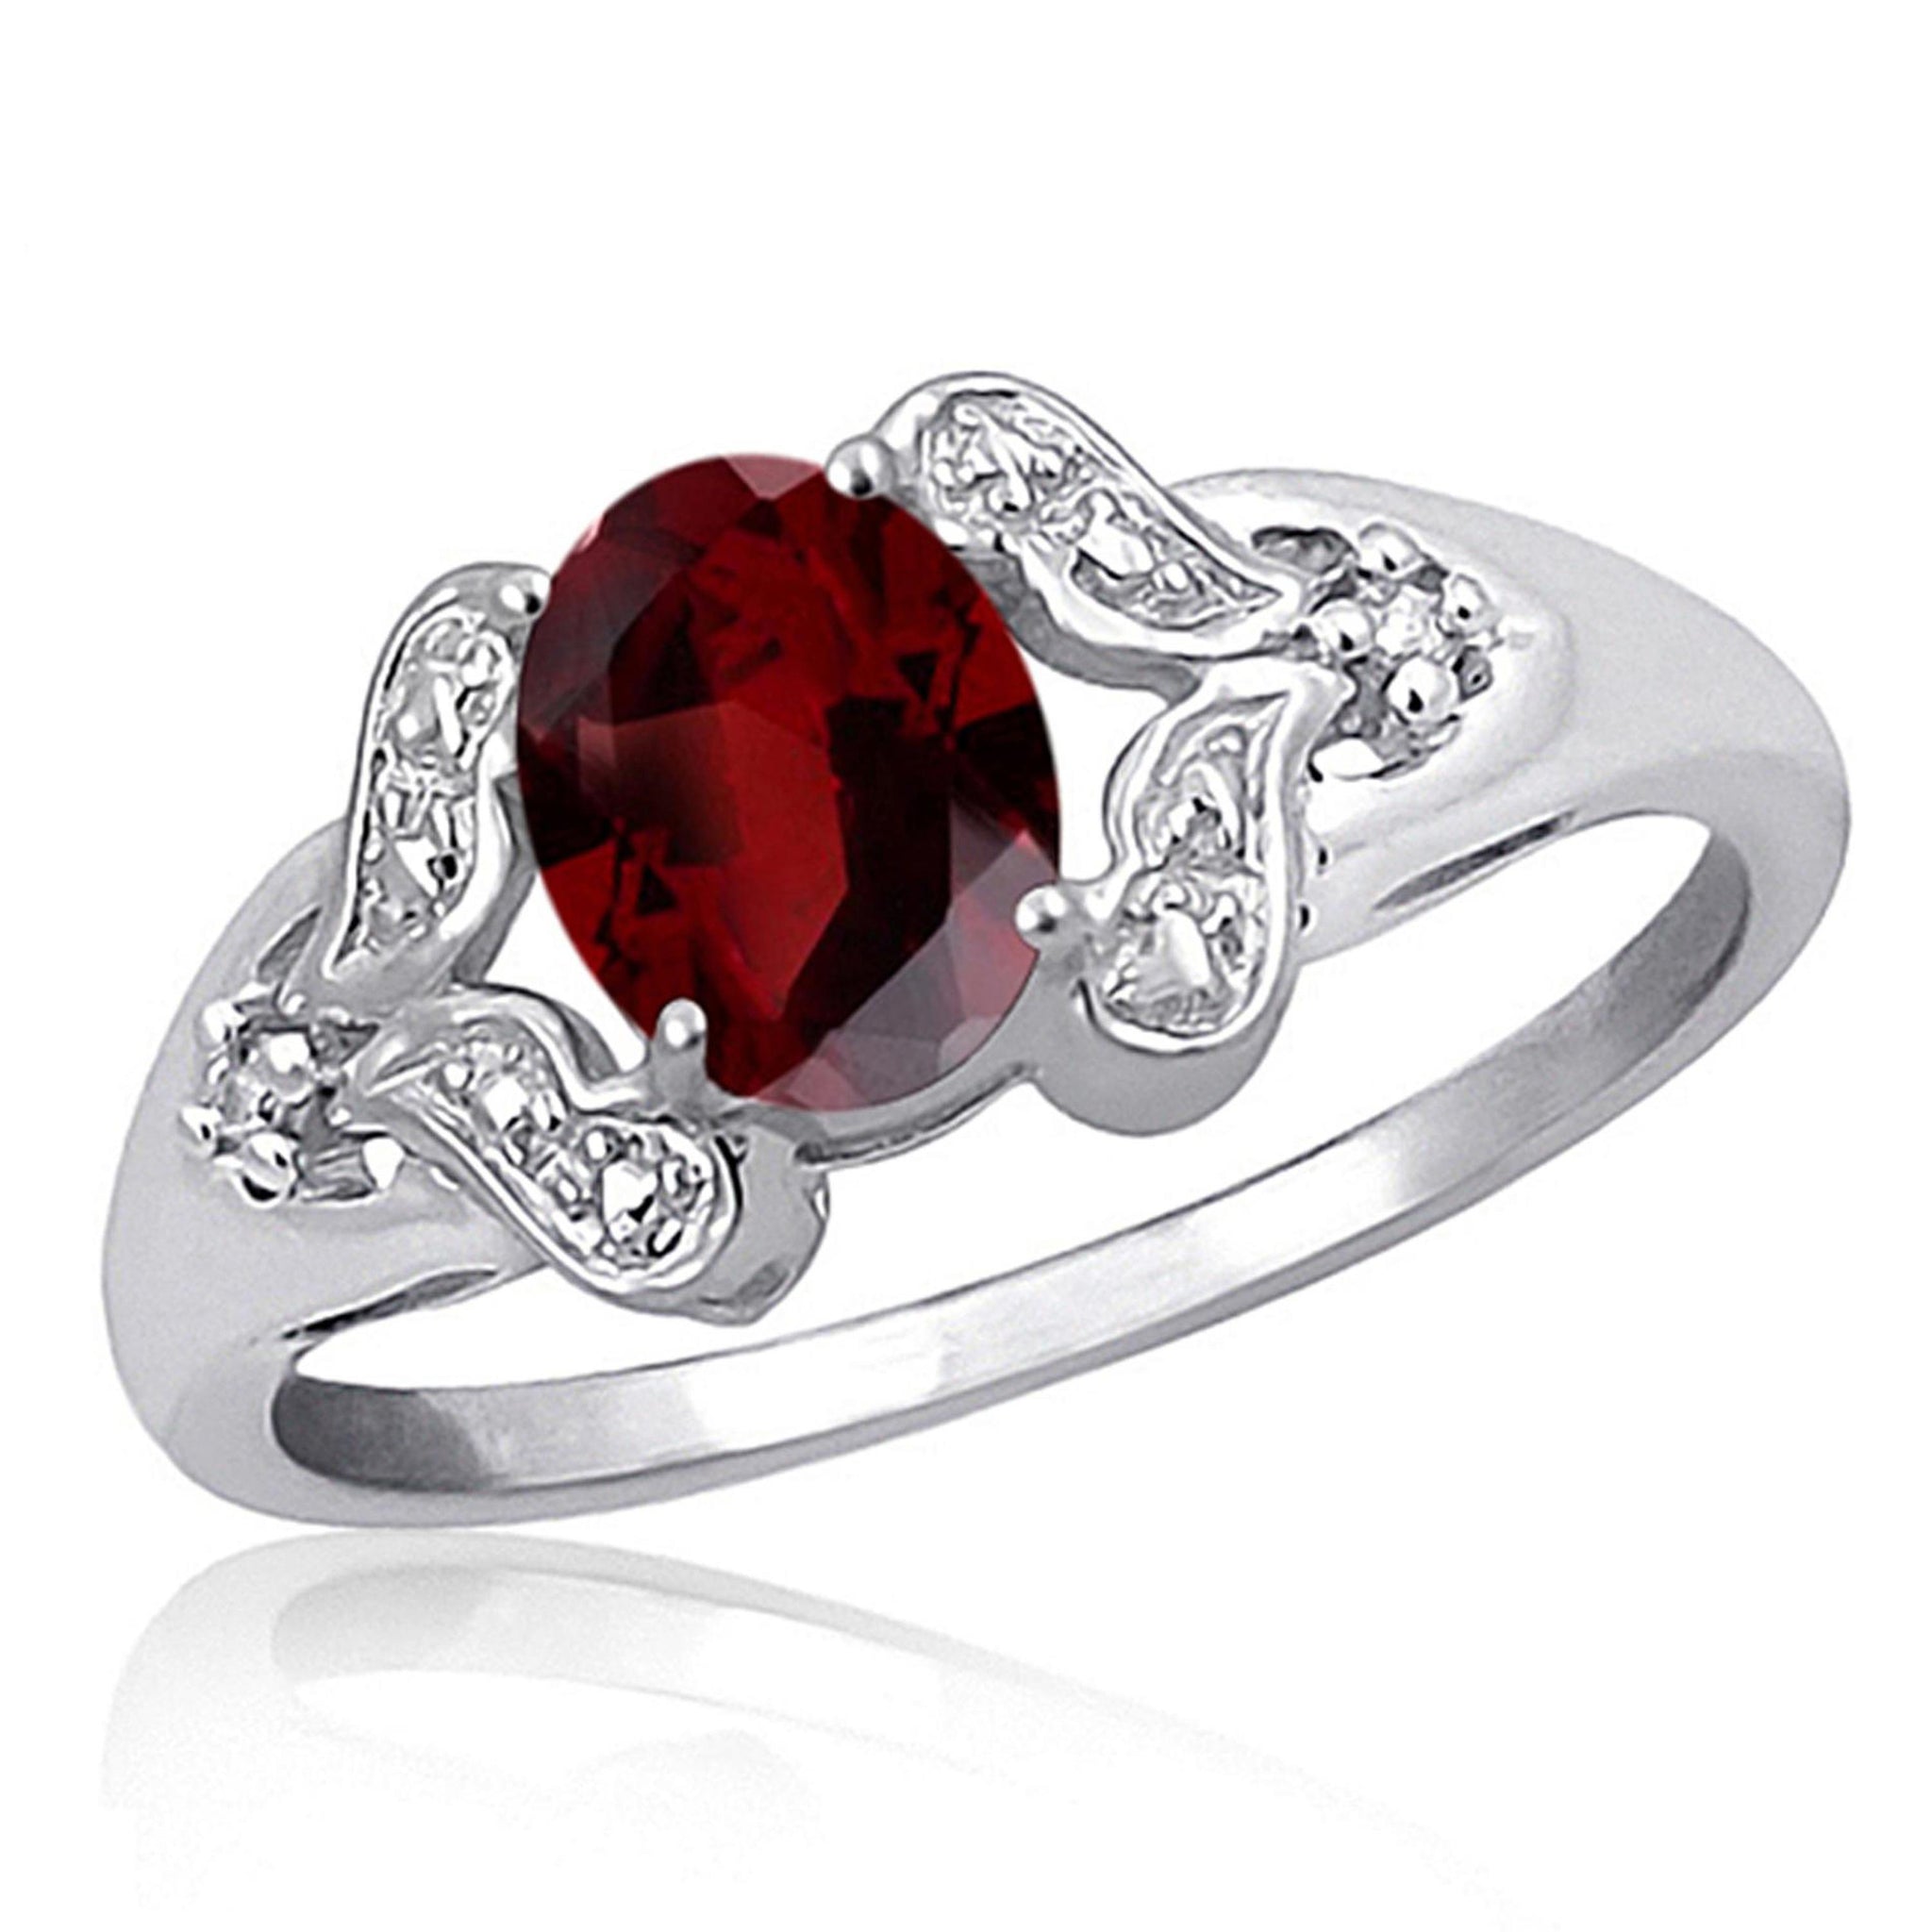 JewelonFire 1.00 Carat T.G.W. Garnet And White Diamond Accent Sterling Silver Ring - Assorted Colors